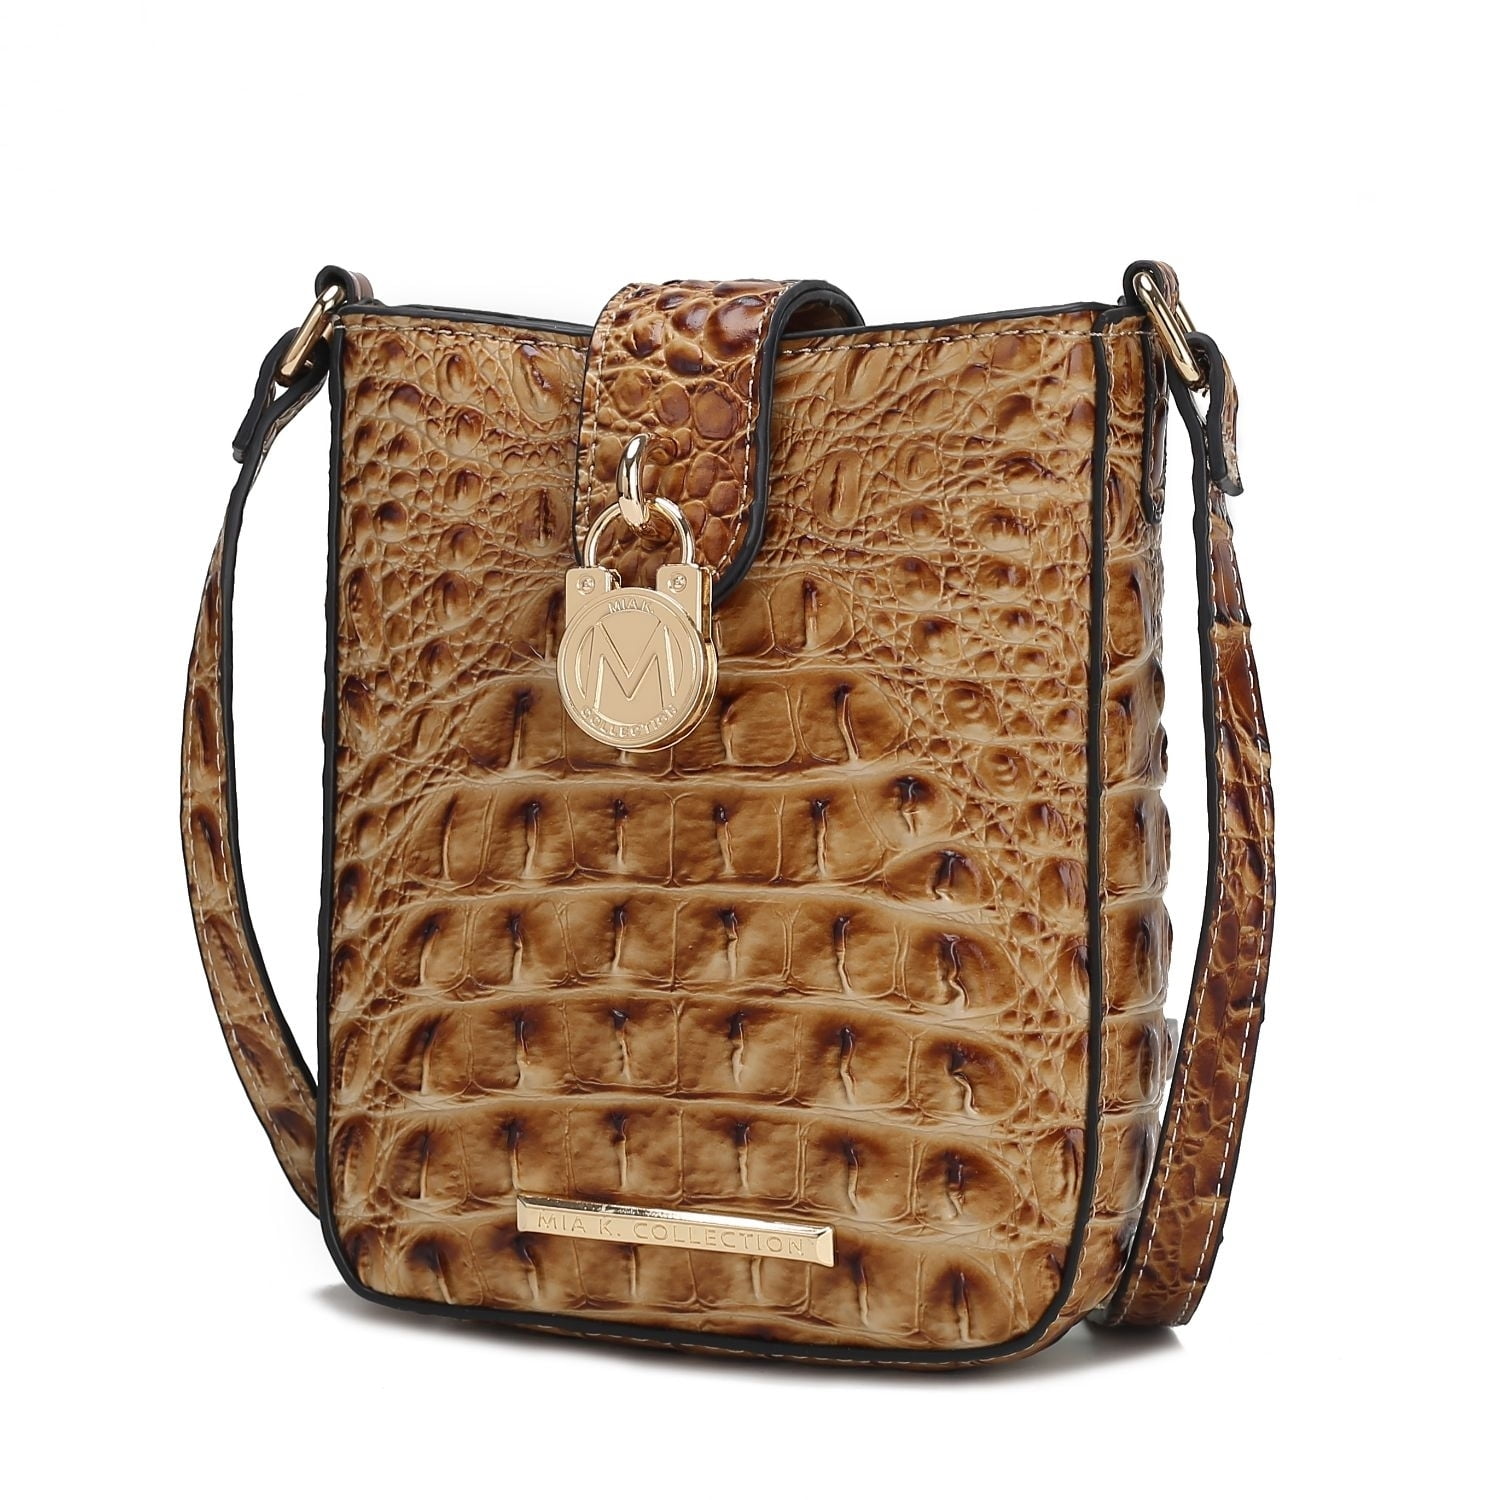 BRAHMIN Leather REPLACEMENT STRAP GOLD TONE HARDWARE CROC EMBOSSED This  strap has no signs of wear